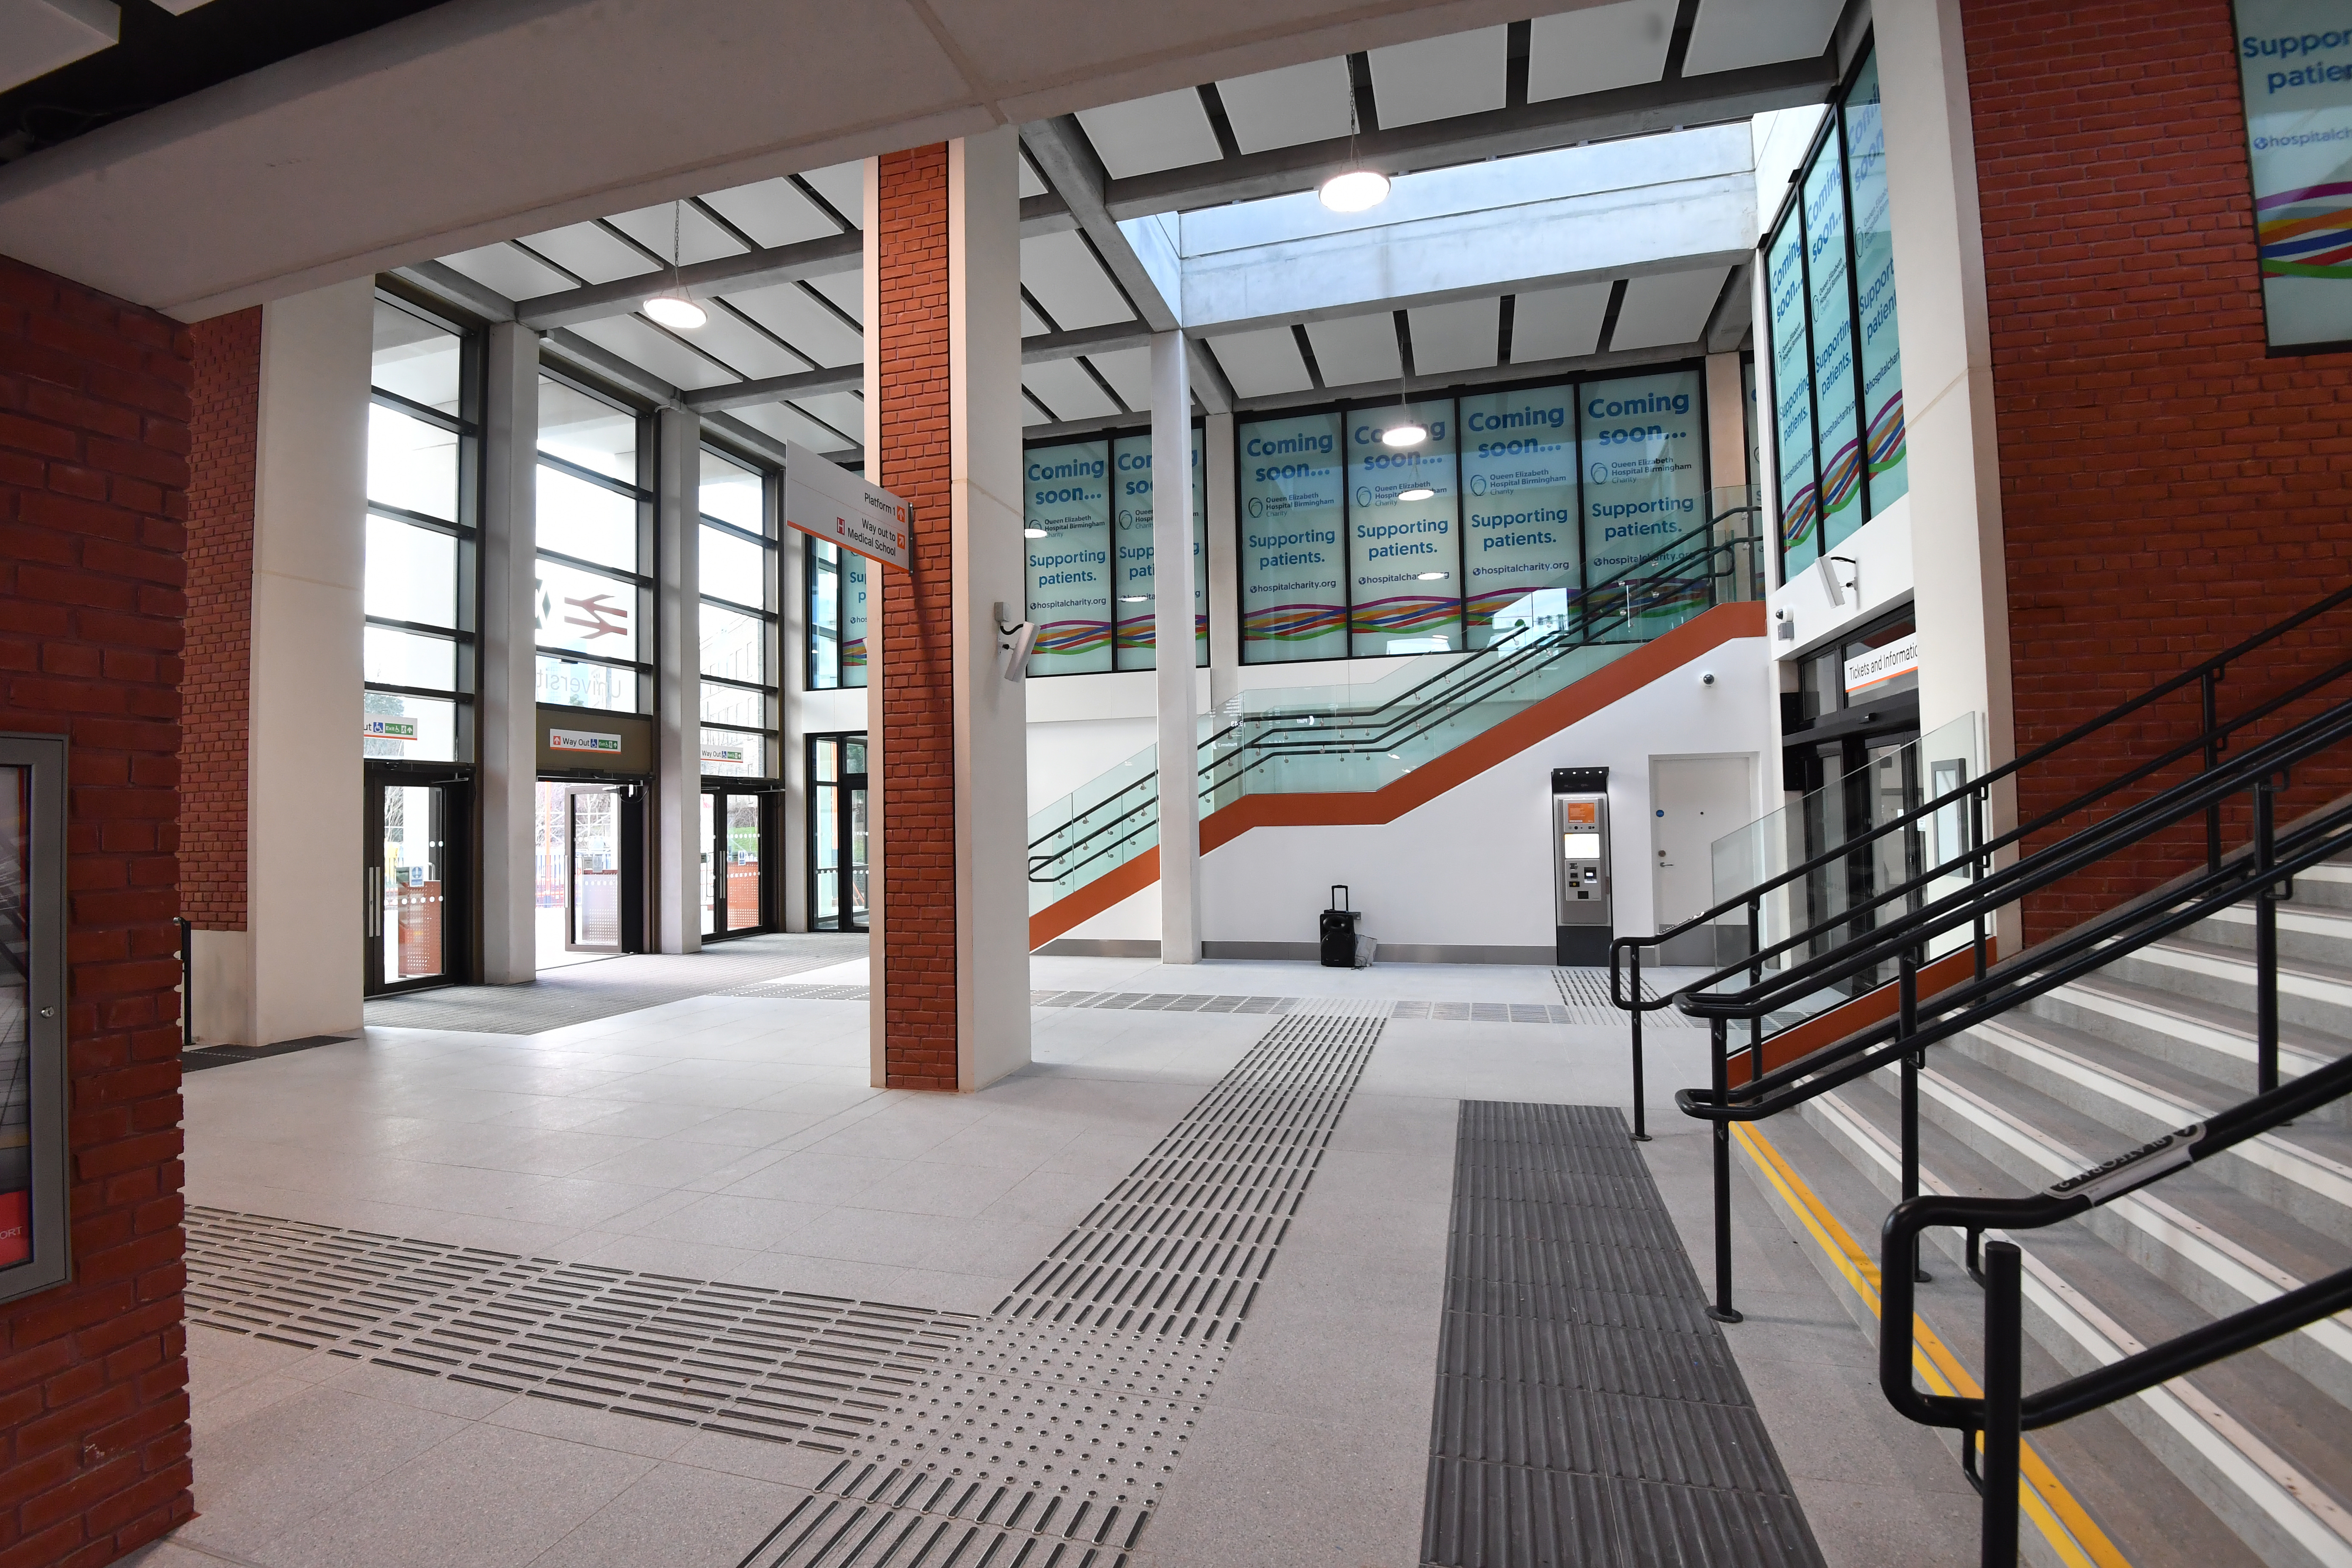 The wide open concourse and stairway of the new main station building